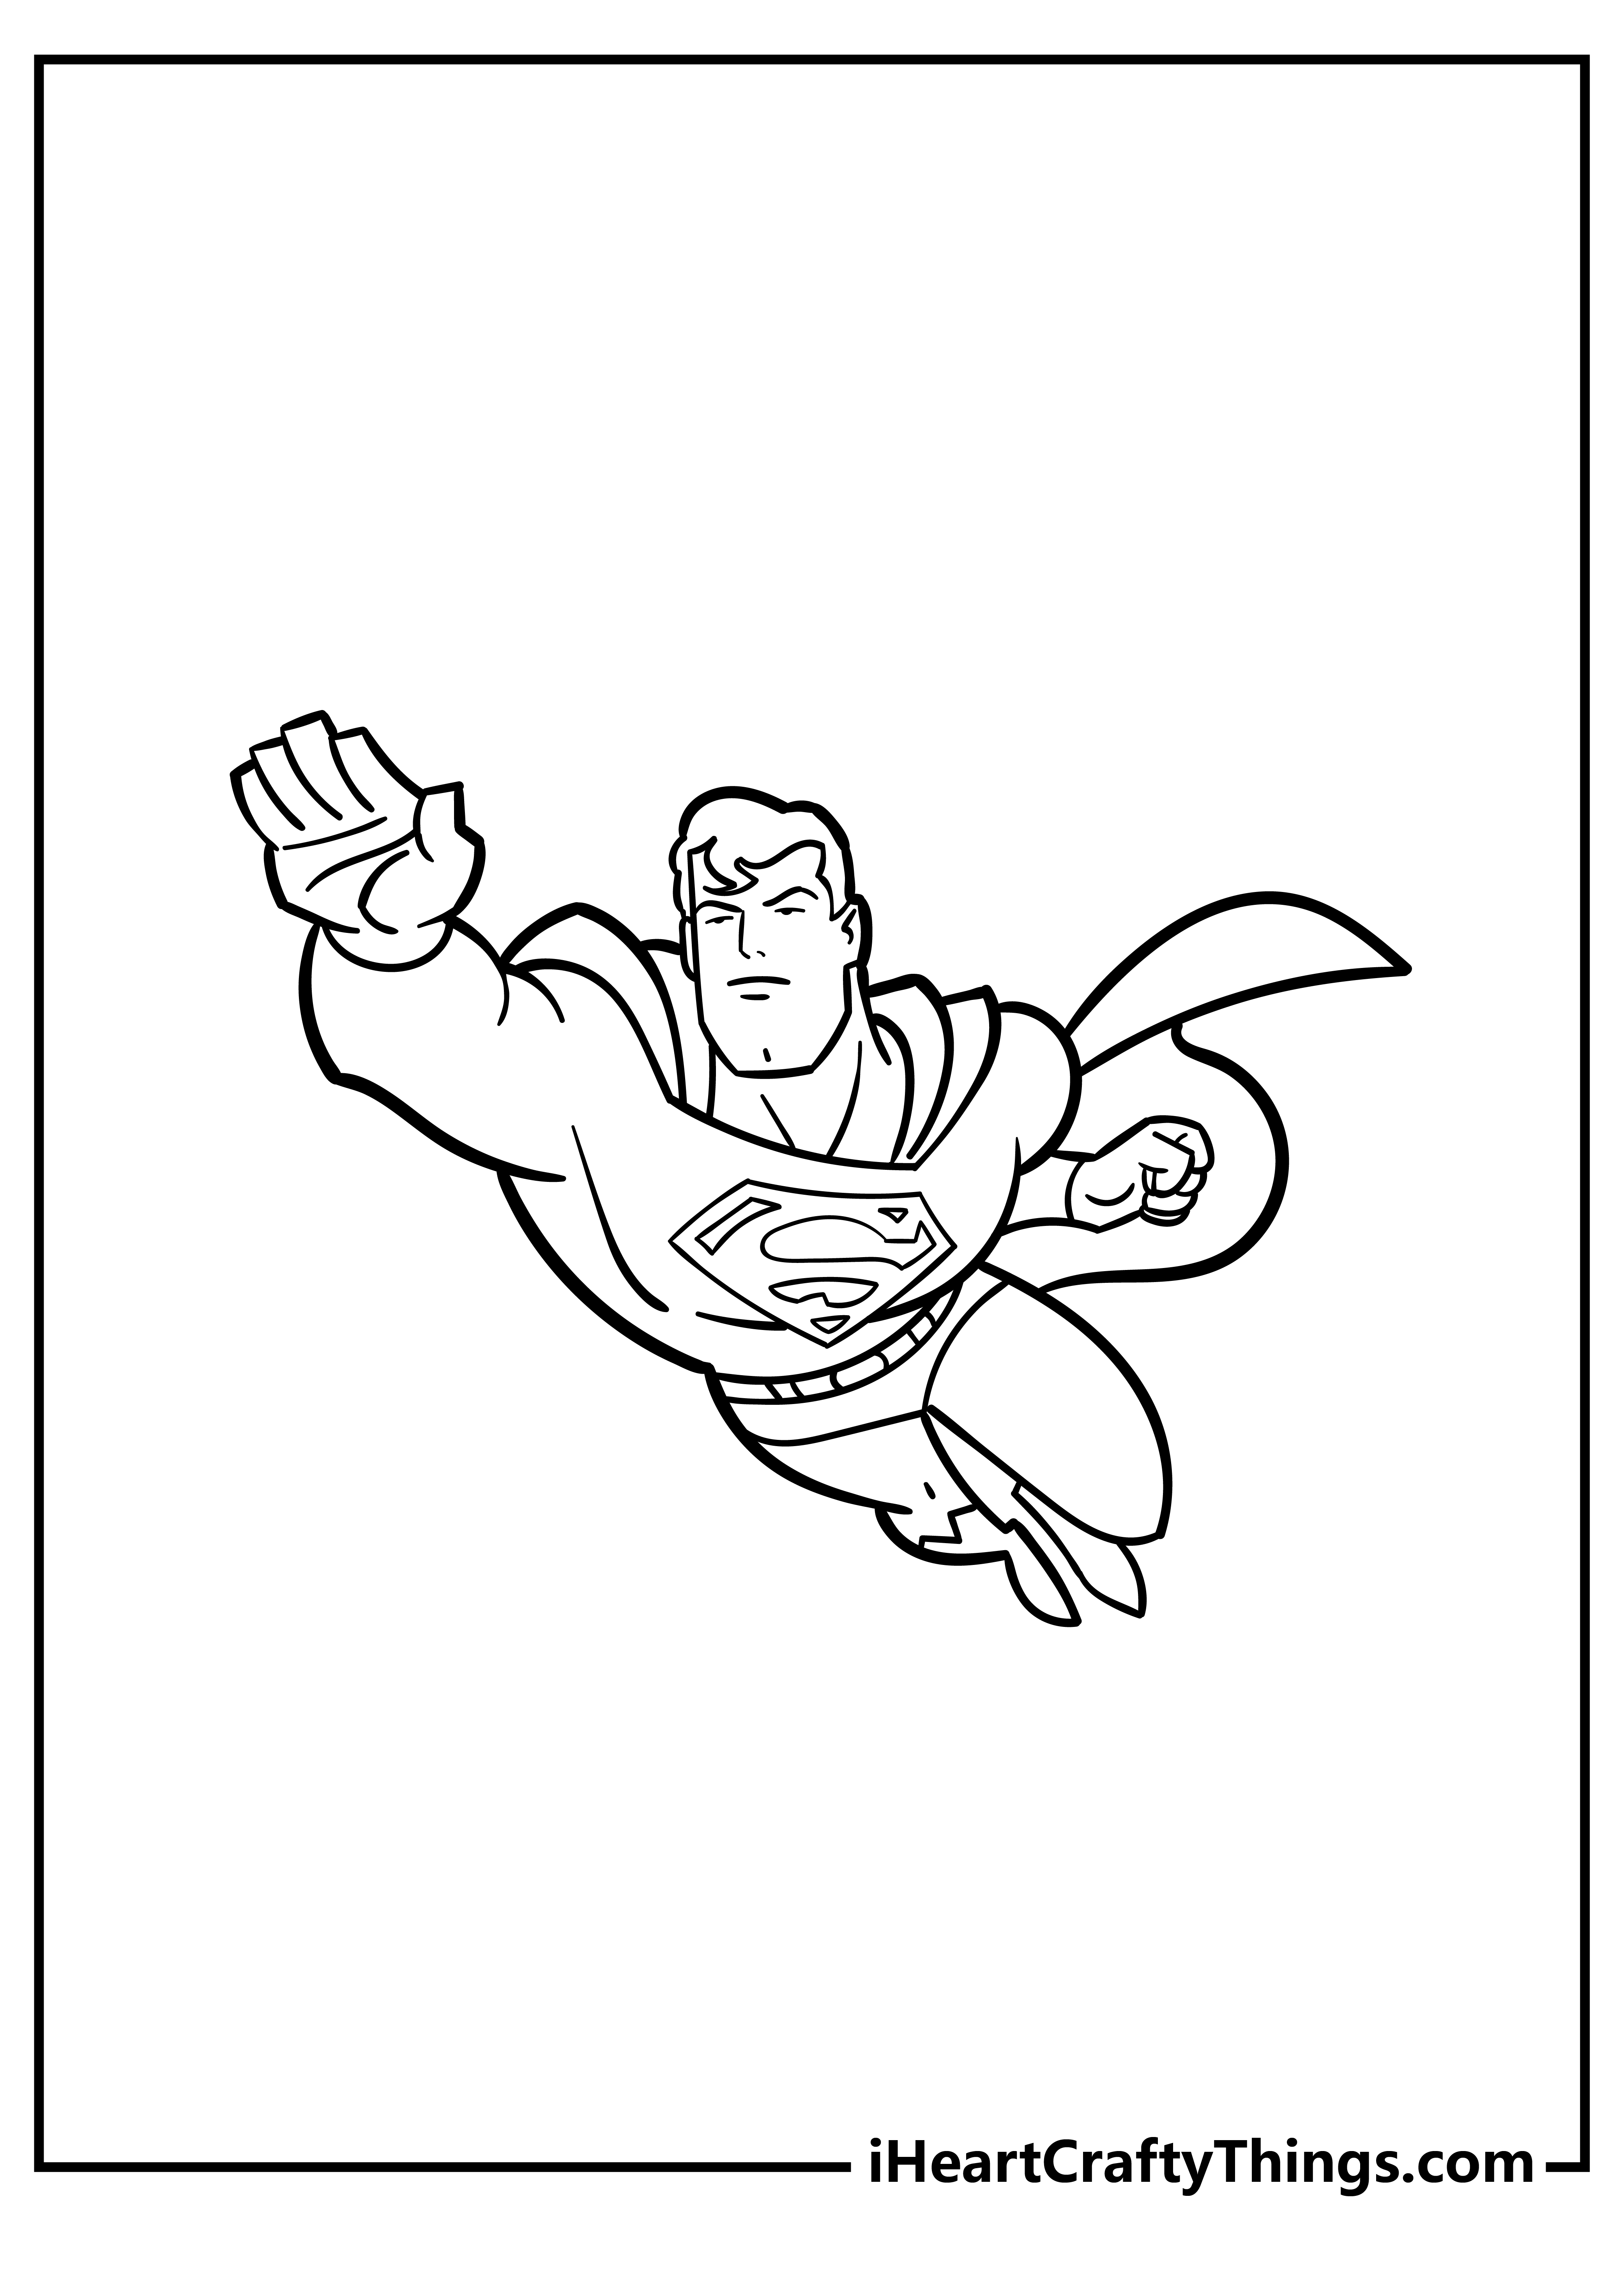 Superman Coloring Pages for adults free printable